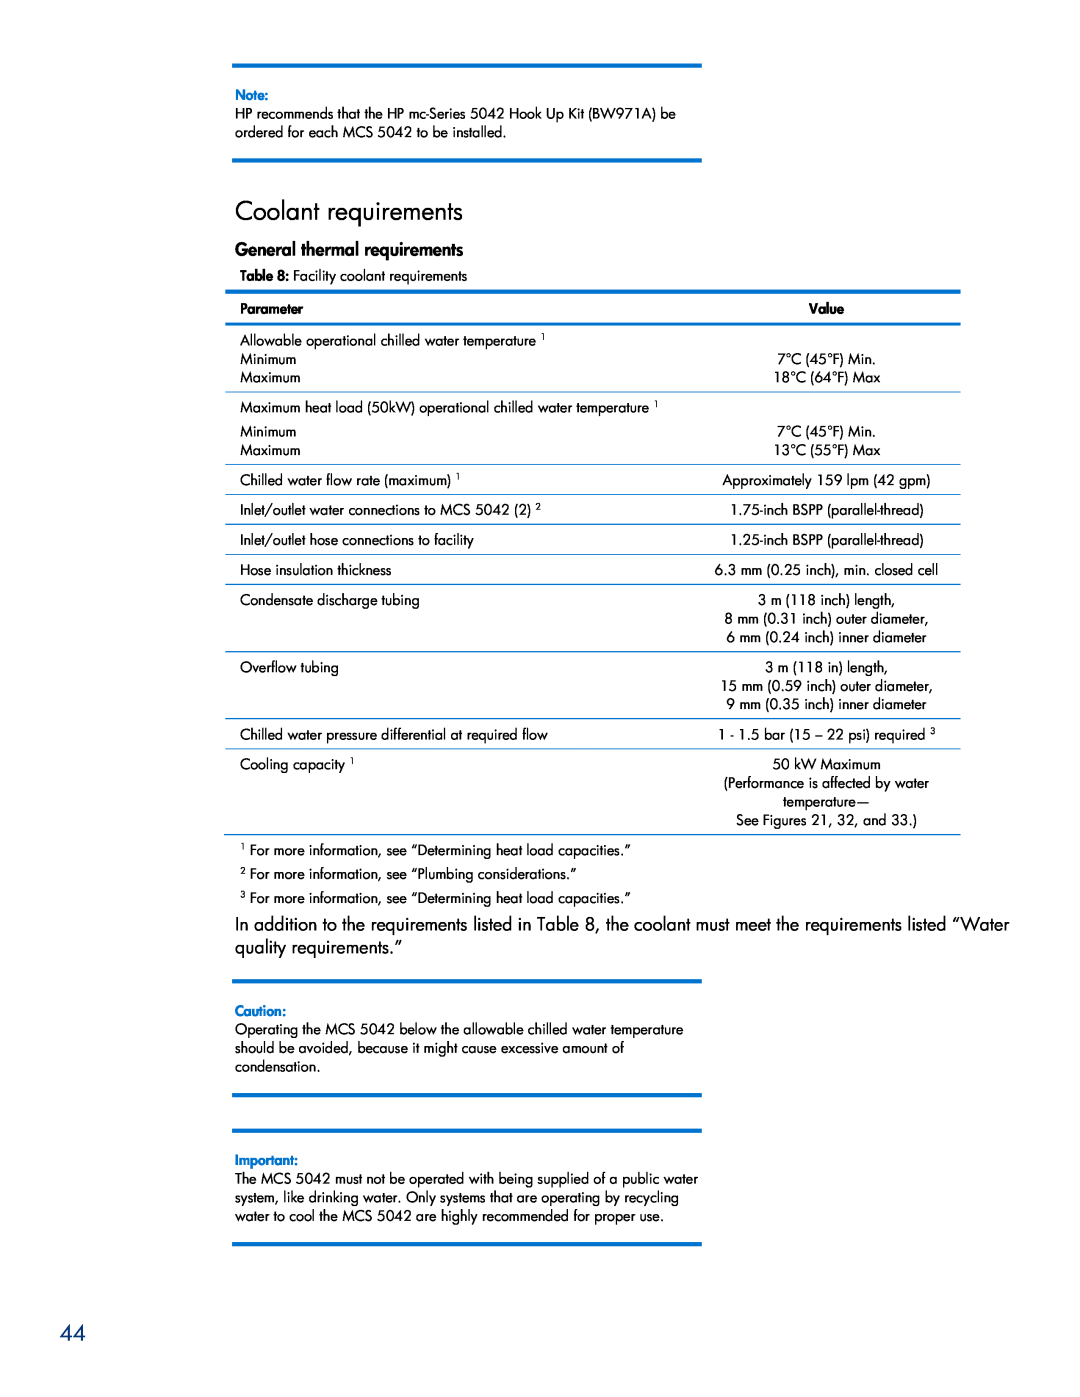 HP Modular Cooling System manual Coolant requirements, General thermal requirements 